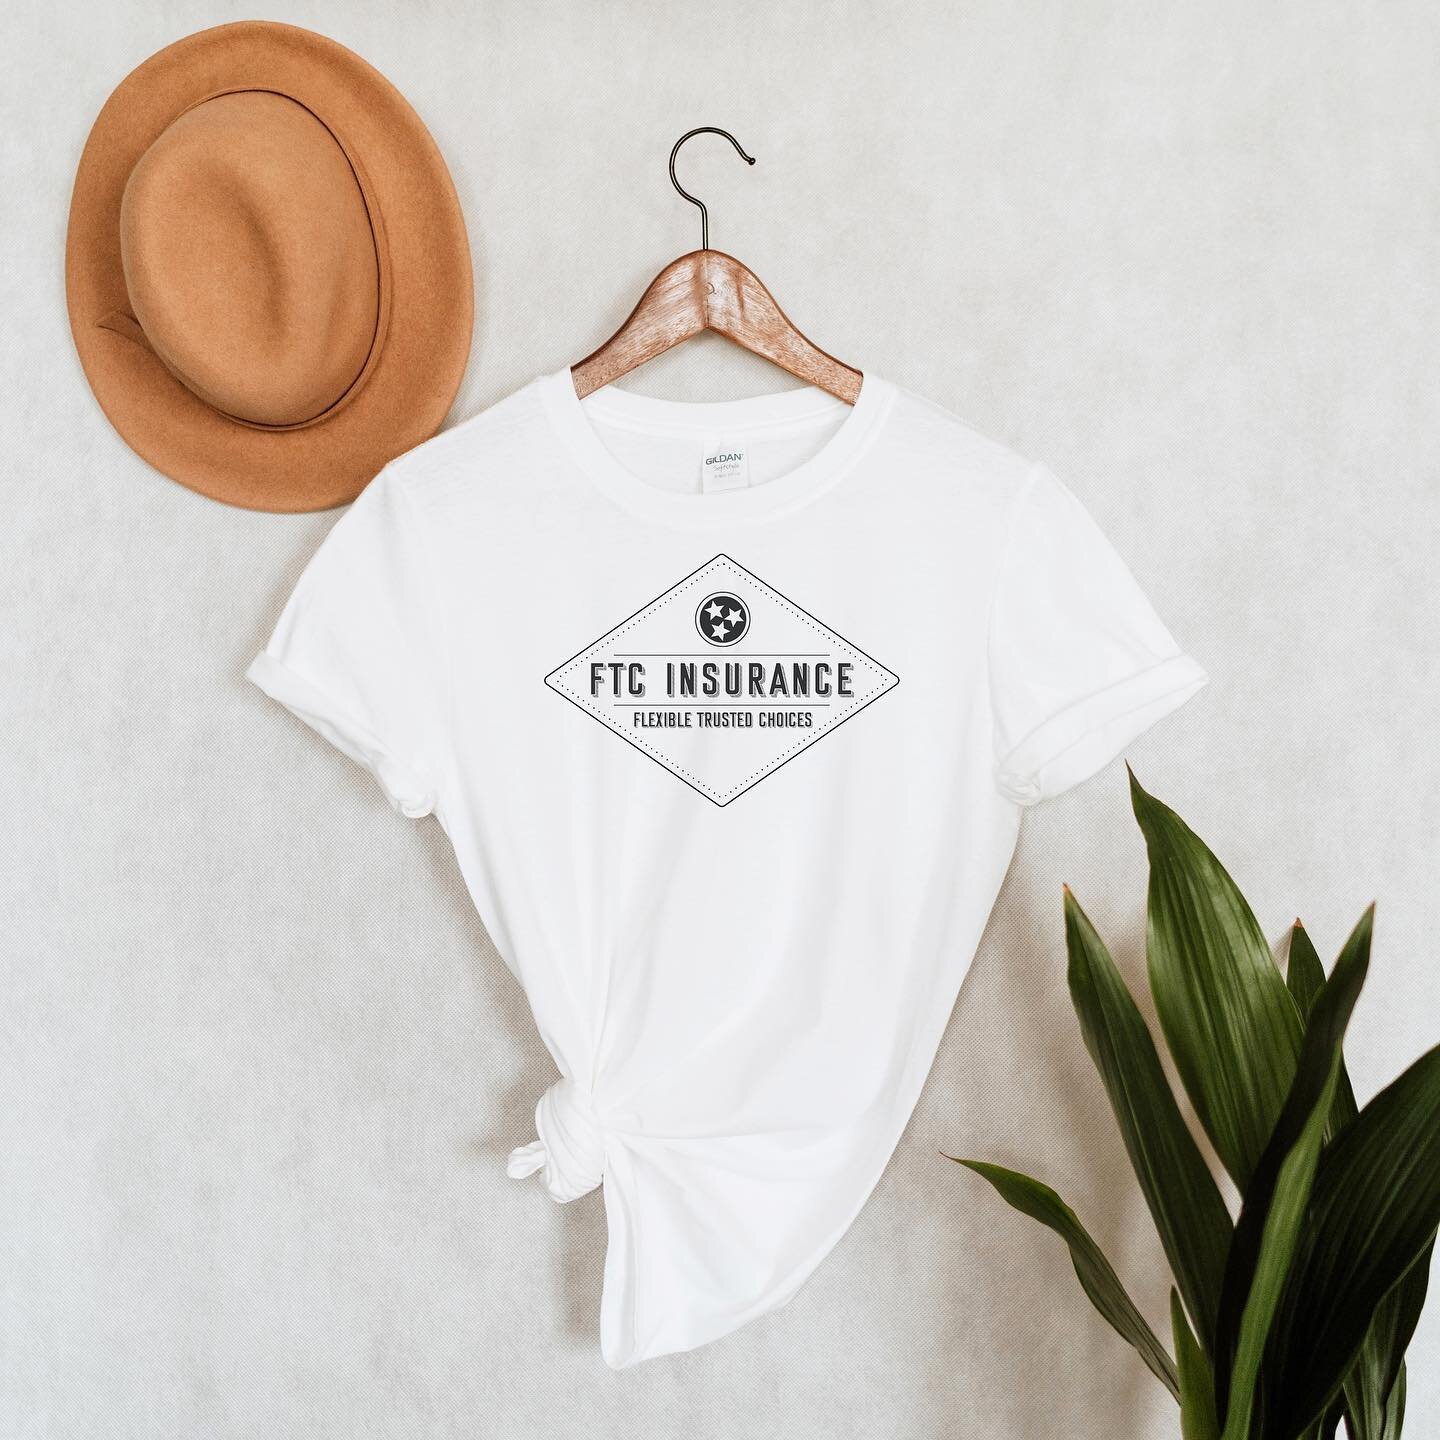 T&rsquo;Shirts are always a fun marketing piece. Love designing T&rsquo;shirts for my clients. So fun!
⭐️
⭐️
⭐️
#brandingdesign #tshirtdesign #logo #logodesigner #brentwoodtn #franklintn #ftcinsurance @ftcinsurance @mcvaycreative